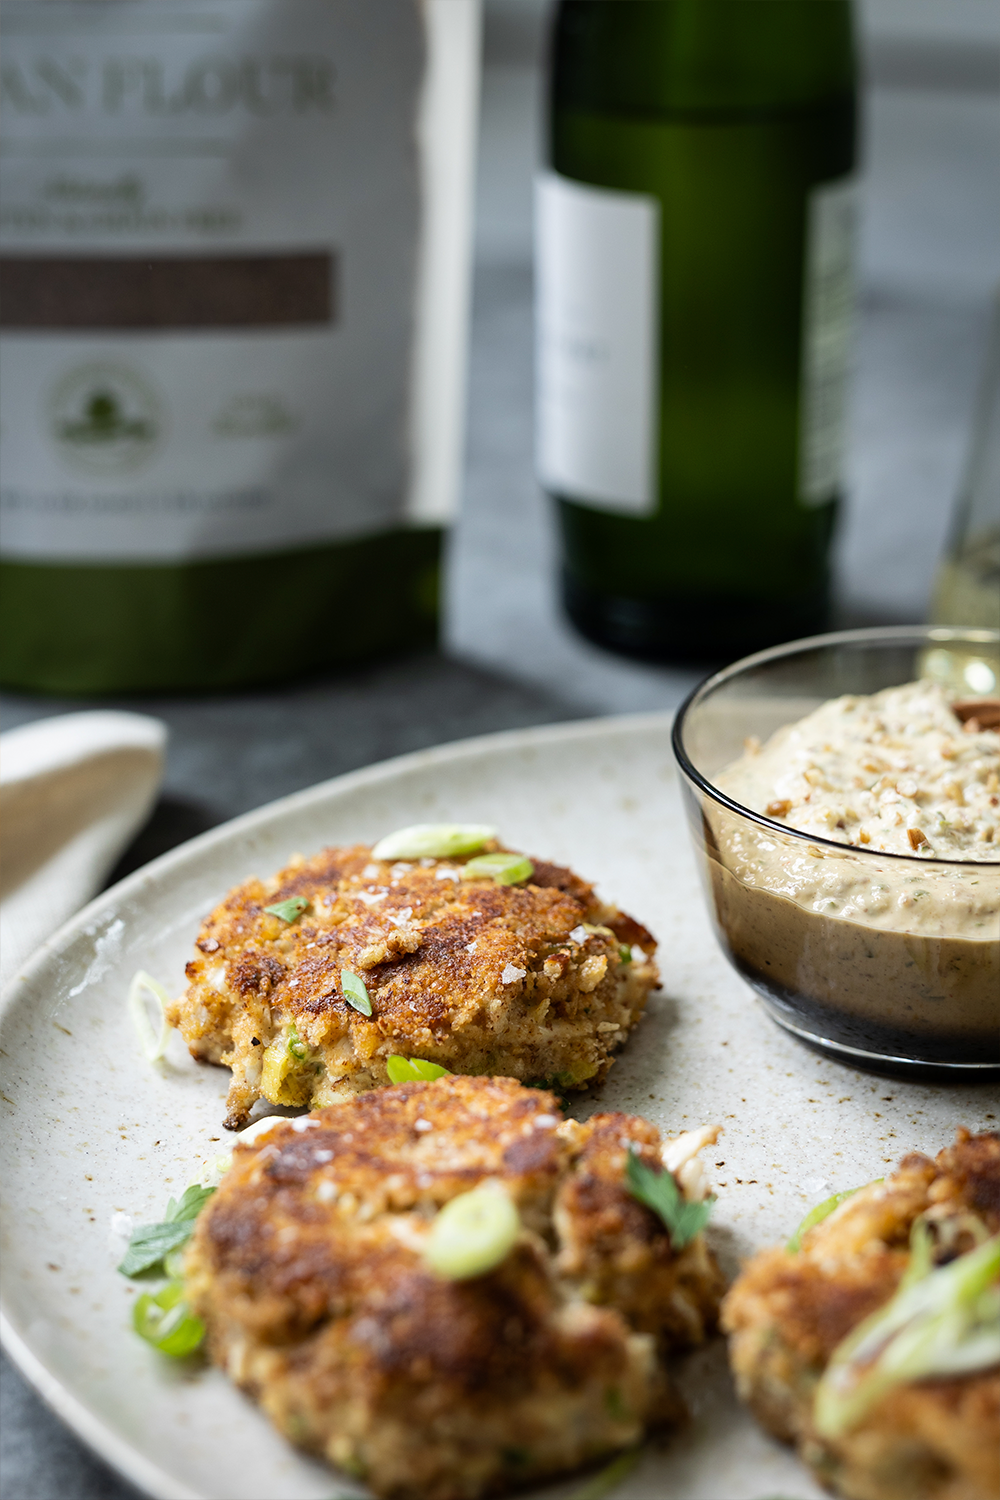 Crab cakes with bag of pecan flour in background